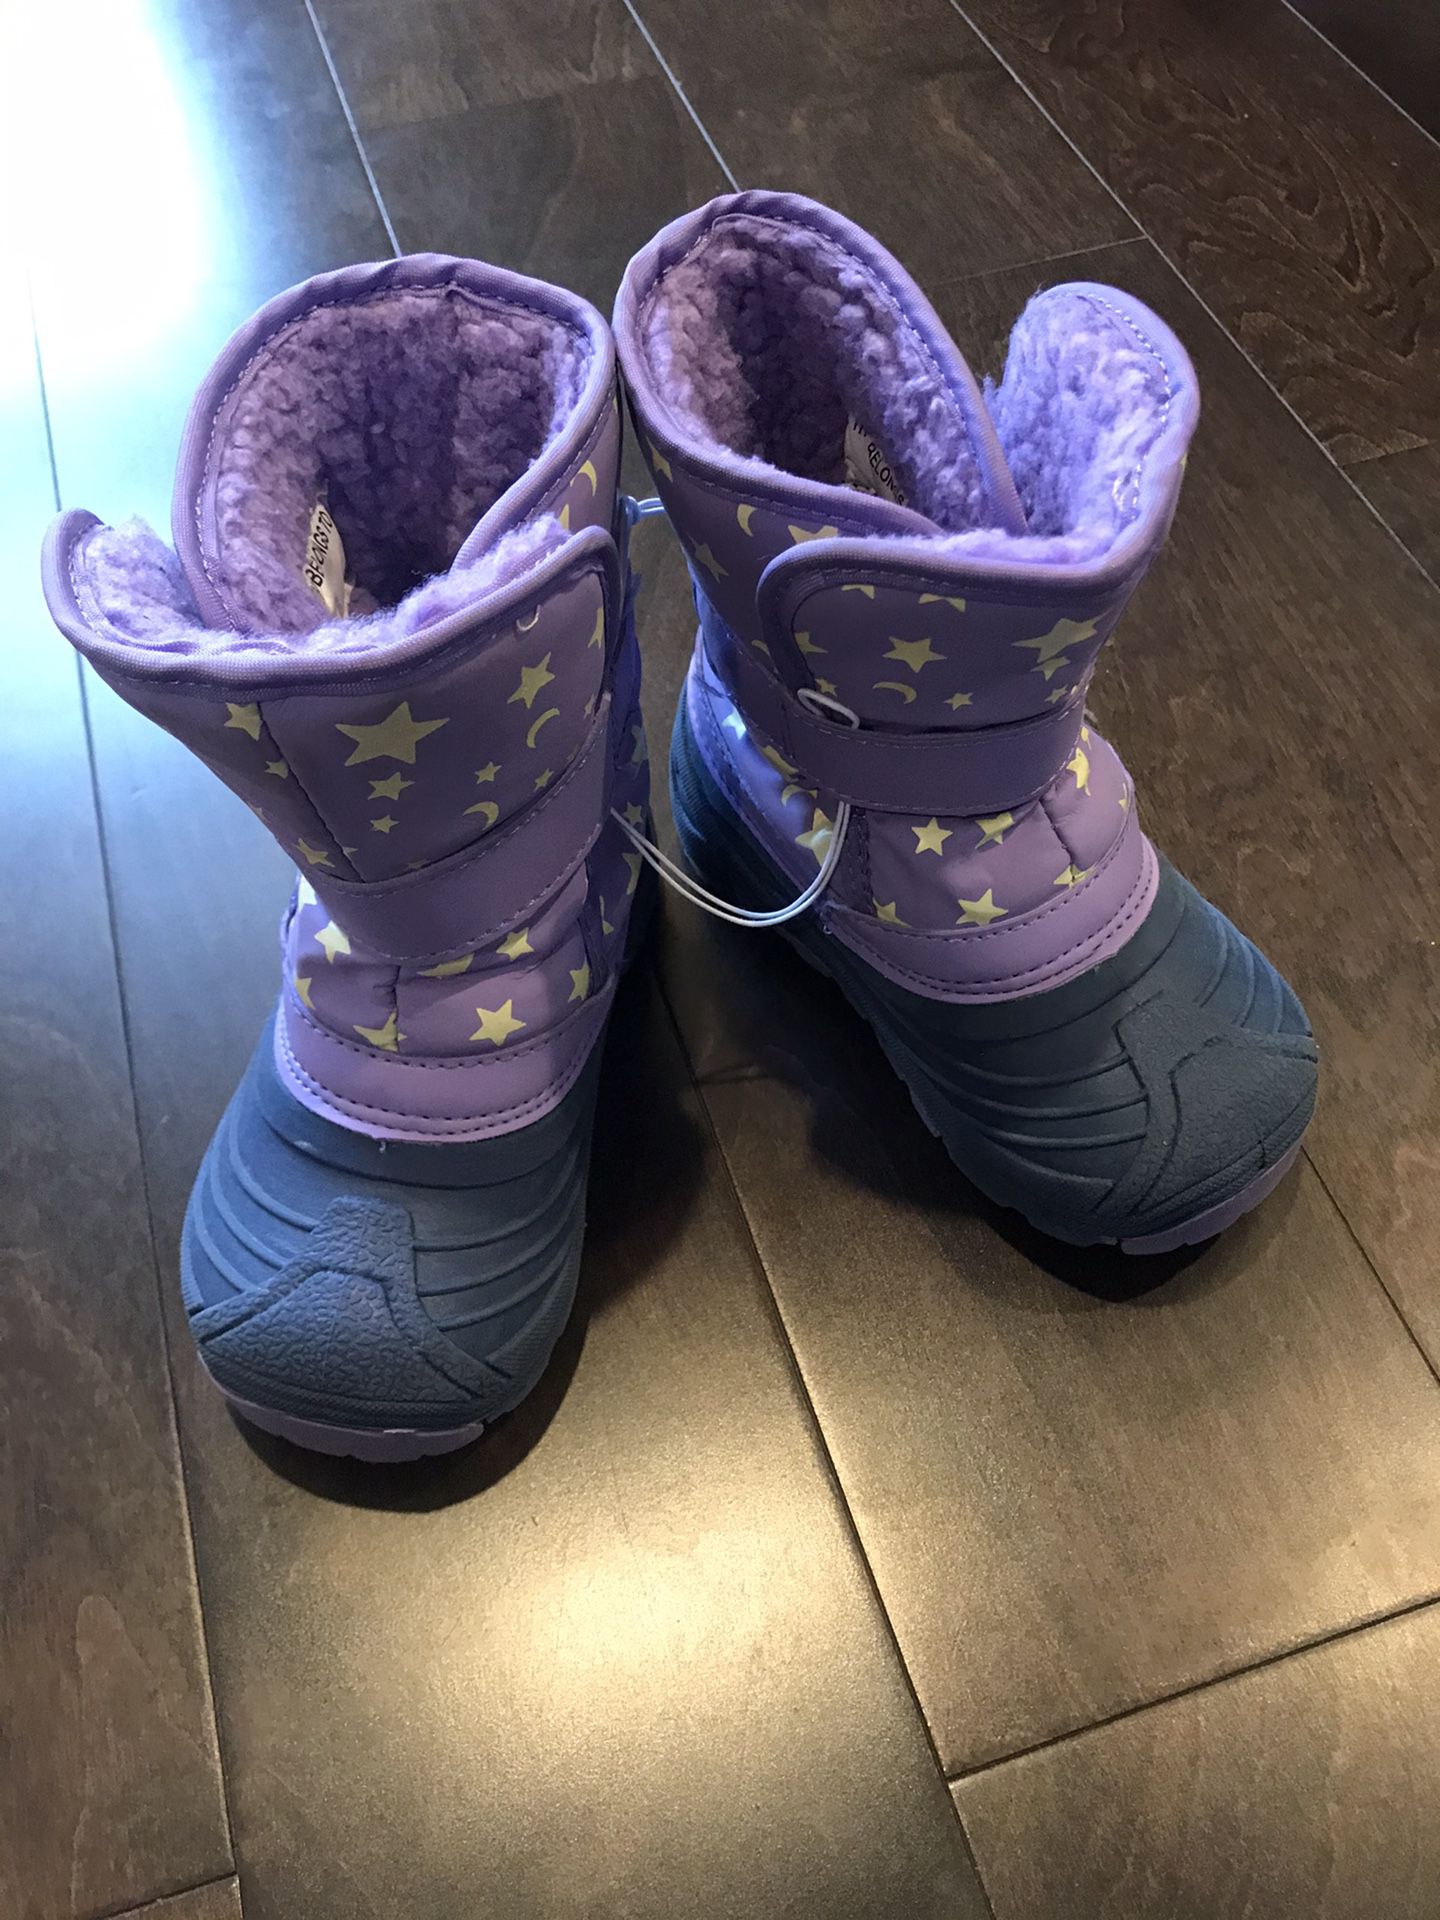 New Toddler girl snow boot shoes size 9